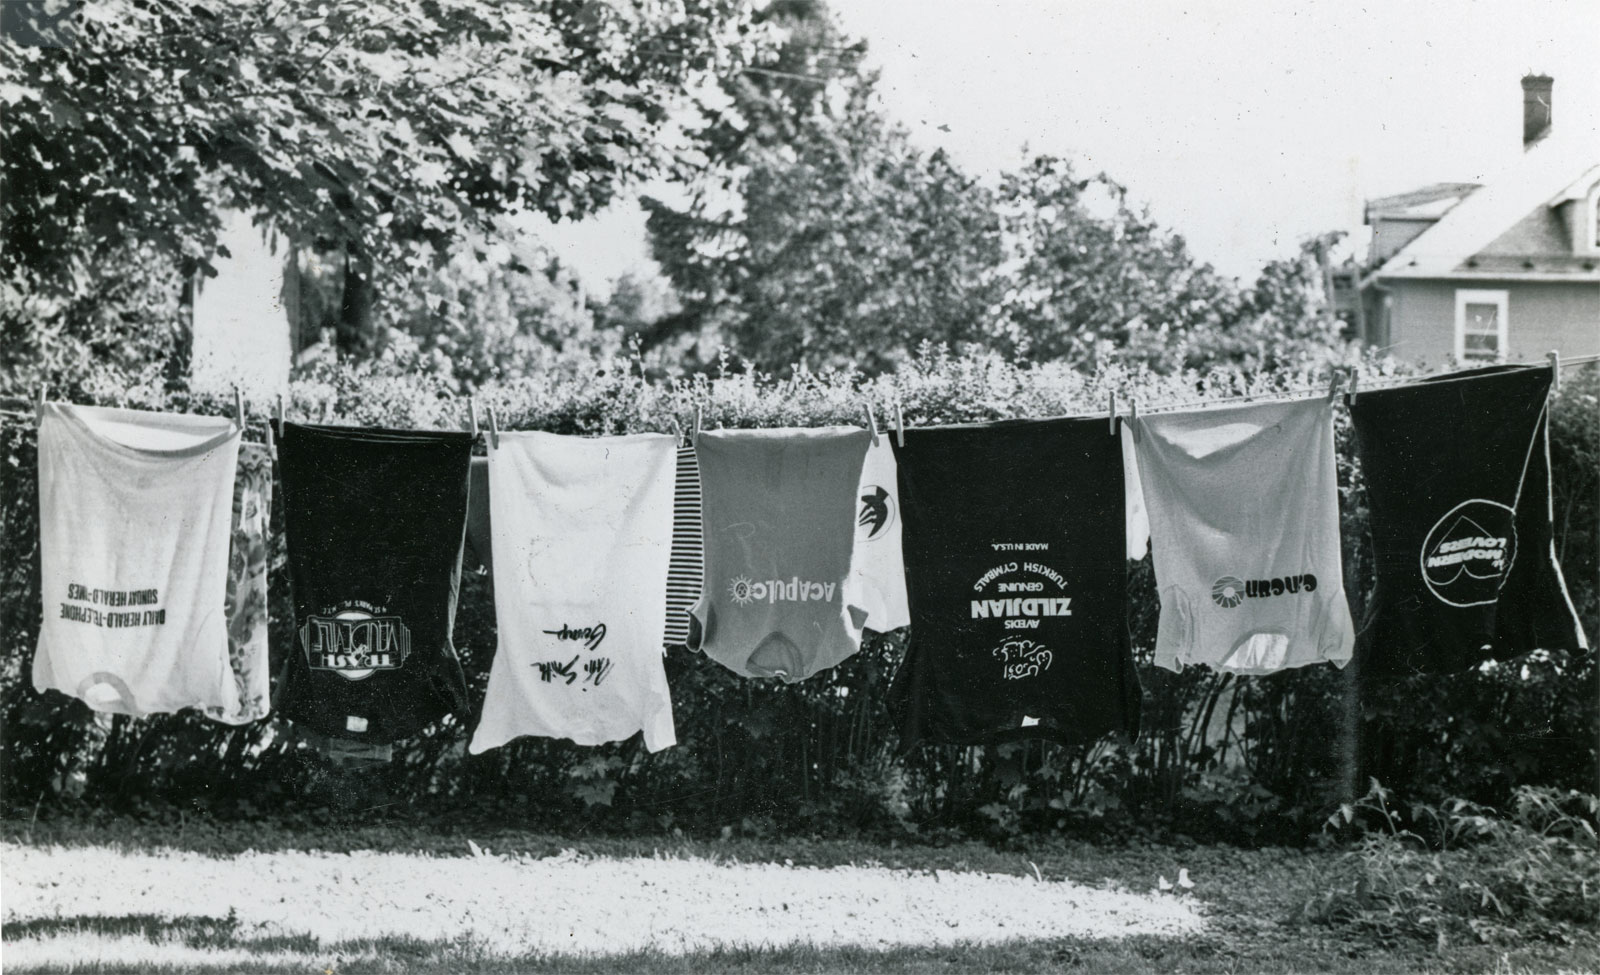 70's t-shirts on clothesline at Dartmouth Street apartment